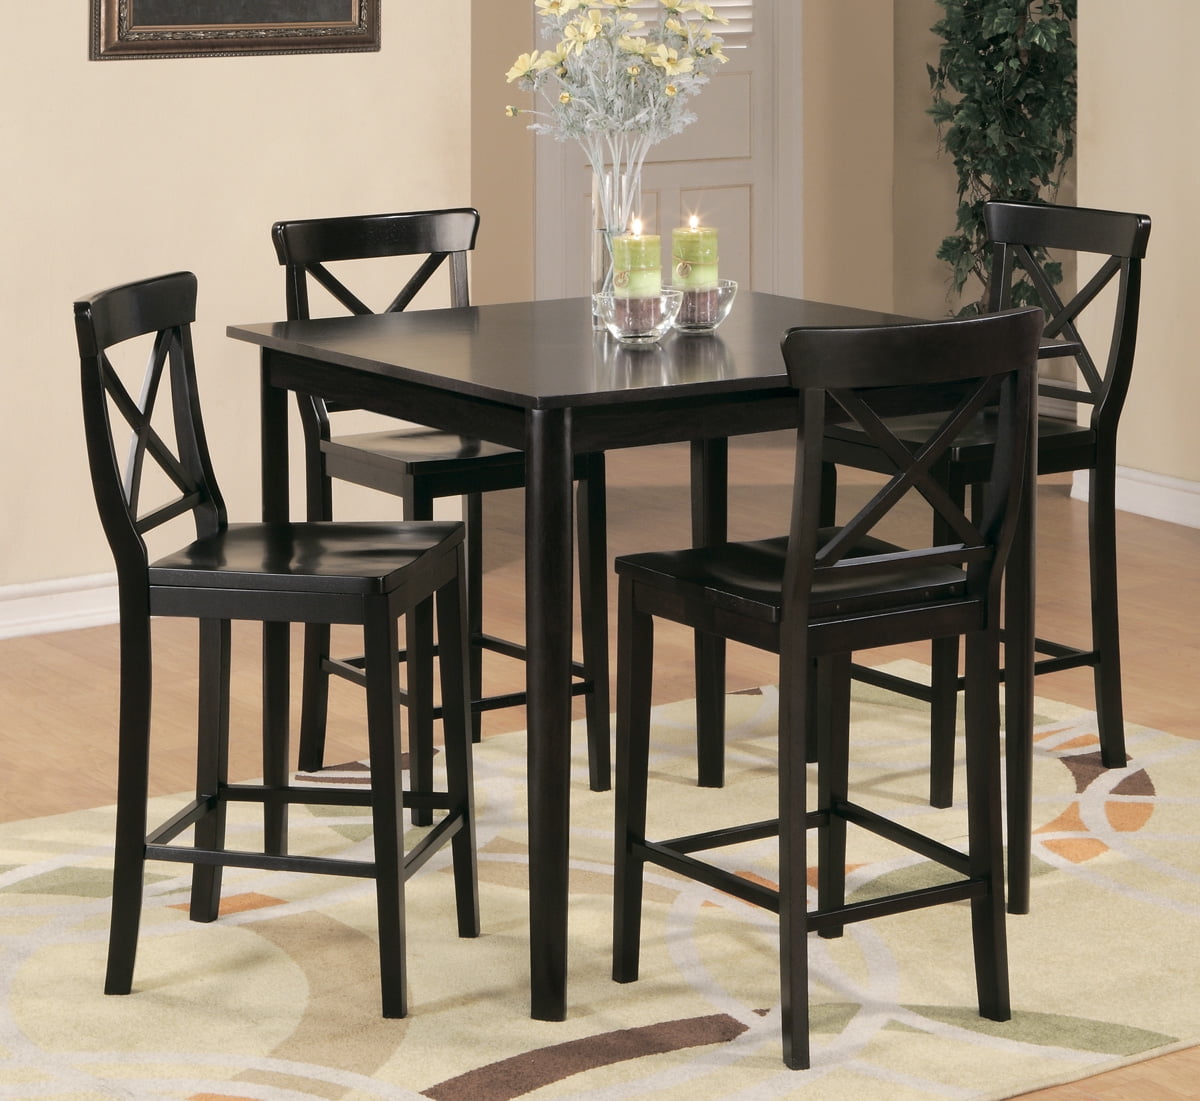 Homelegance Blossom Hill Square Counter Height Table in Wenge - Walmart.com